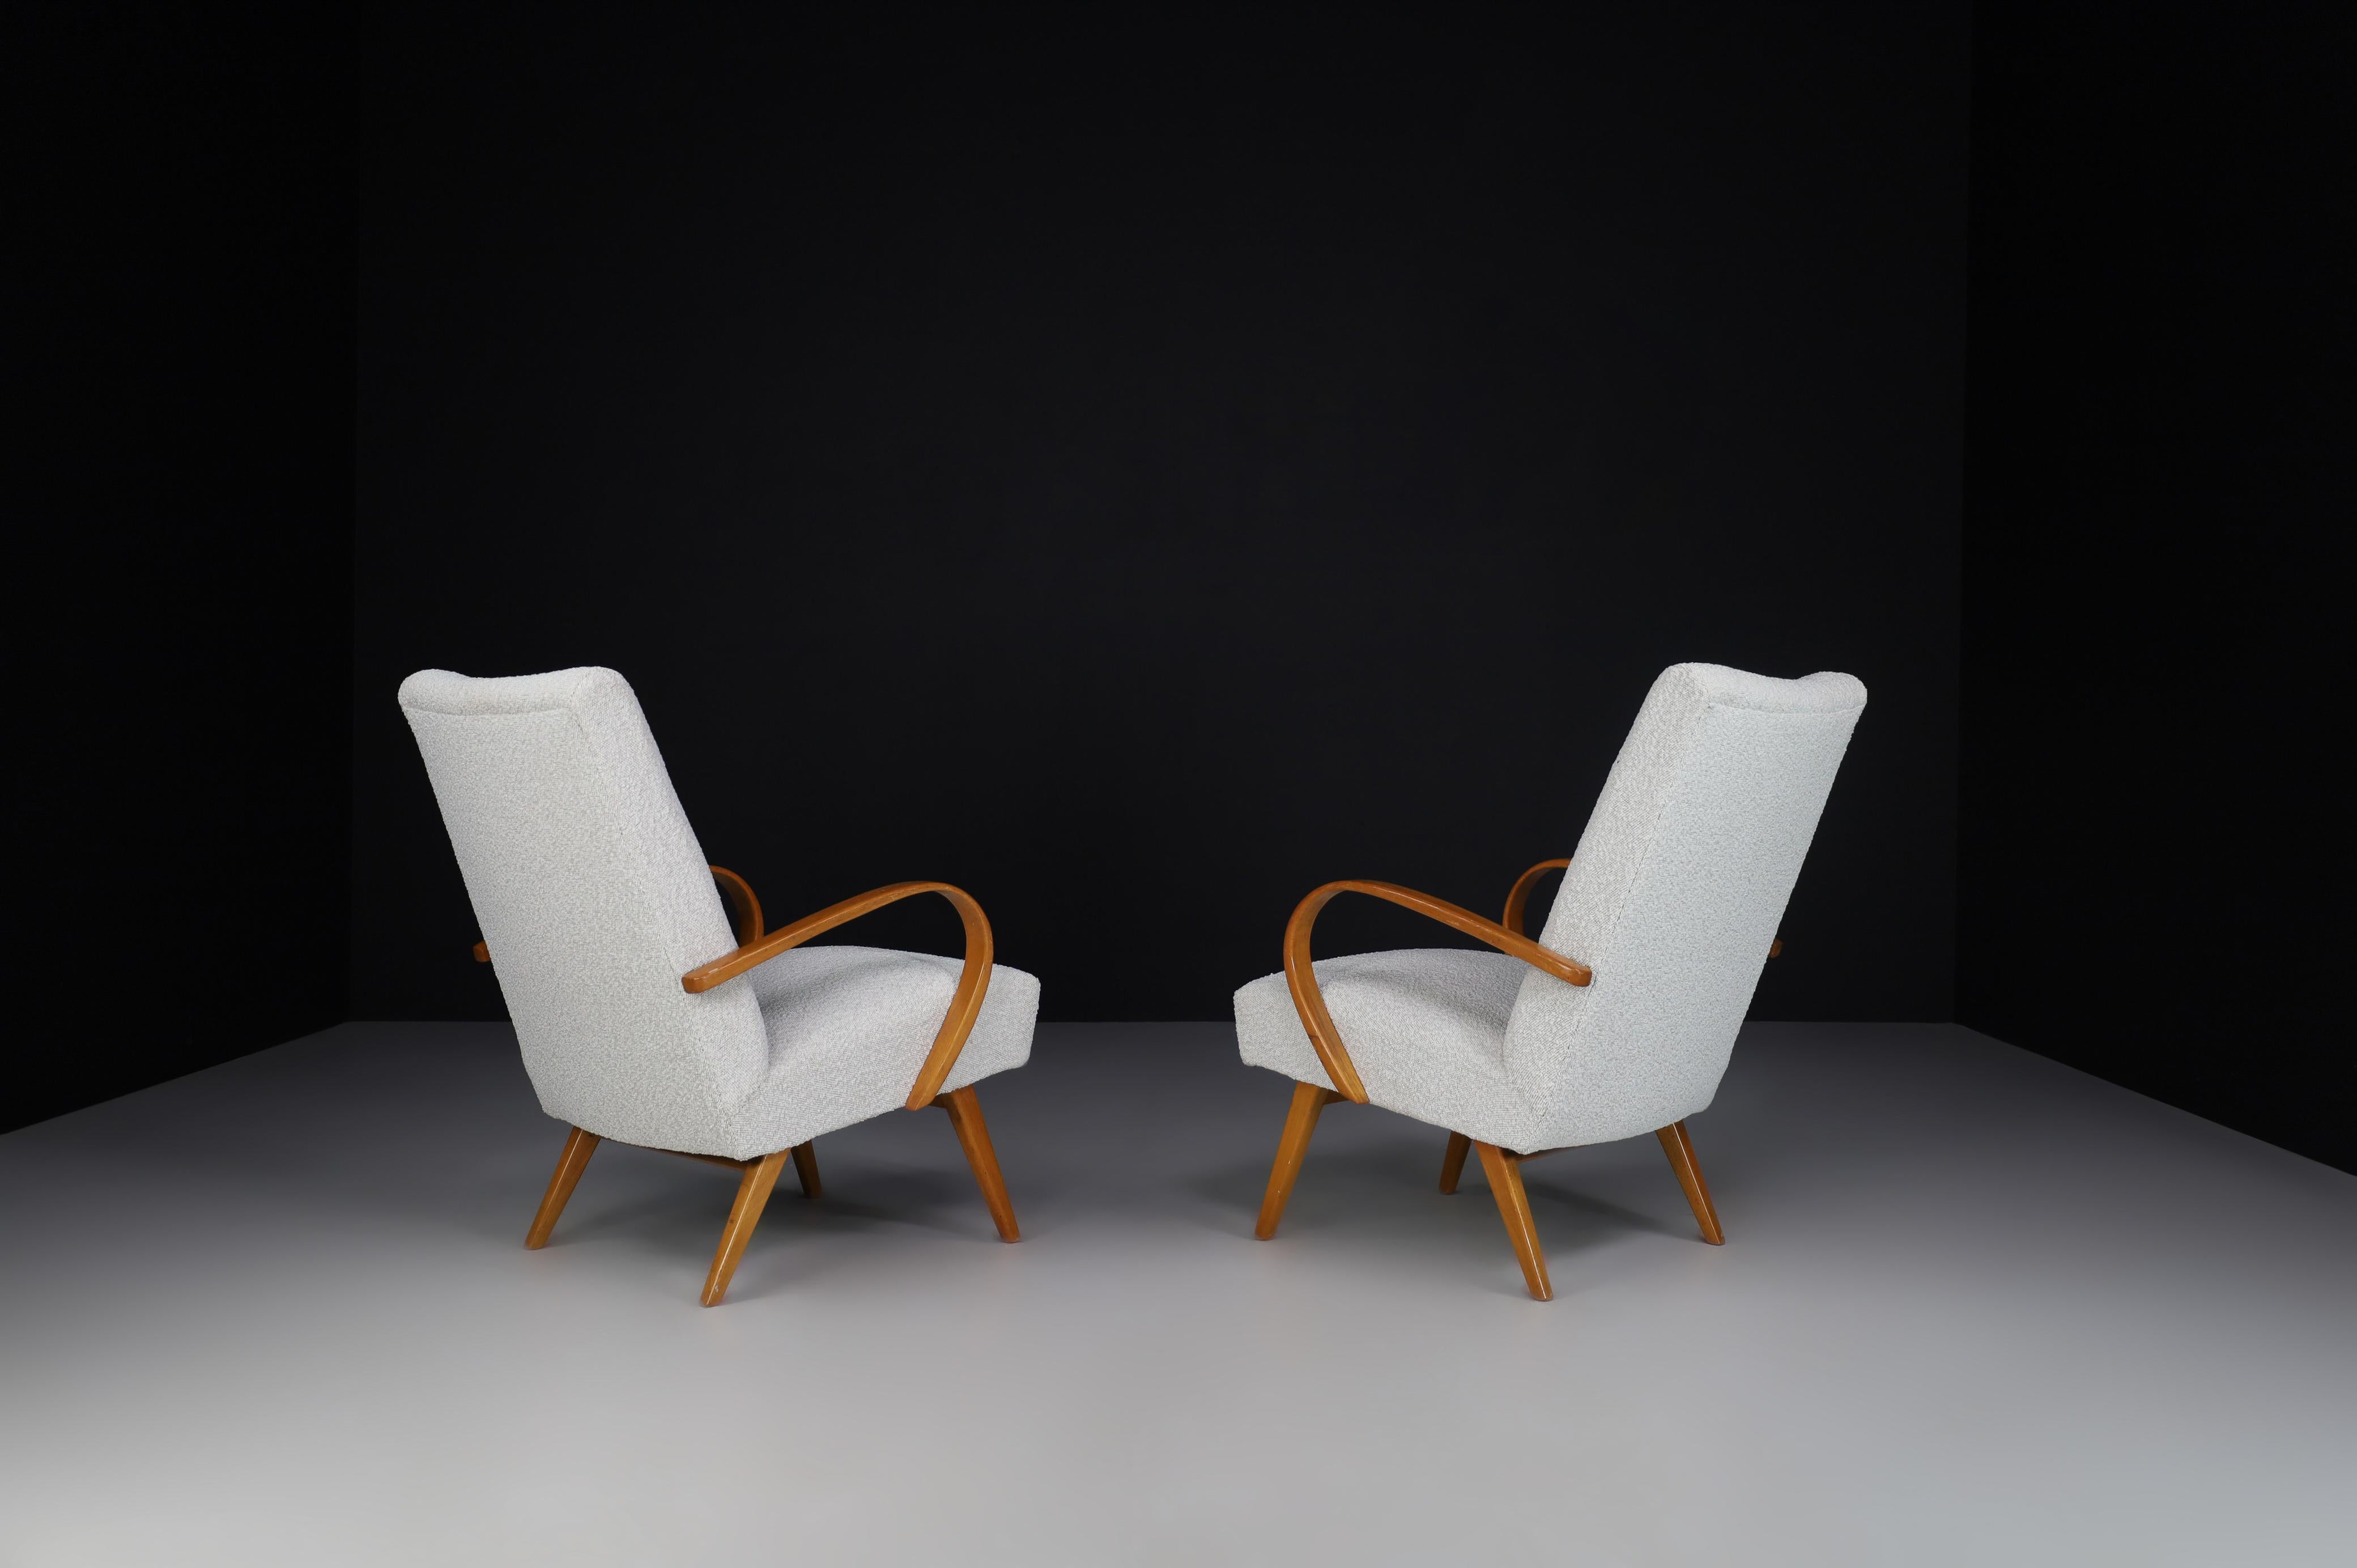 Blond Bentwood Armchairs Manufactured and Designed in Praque, 1950s For Sale 2